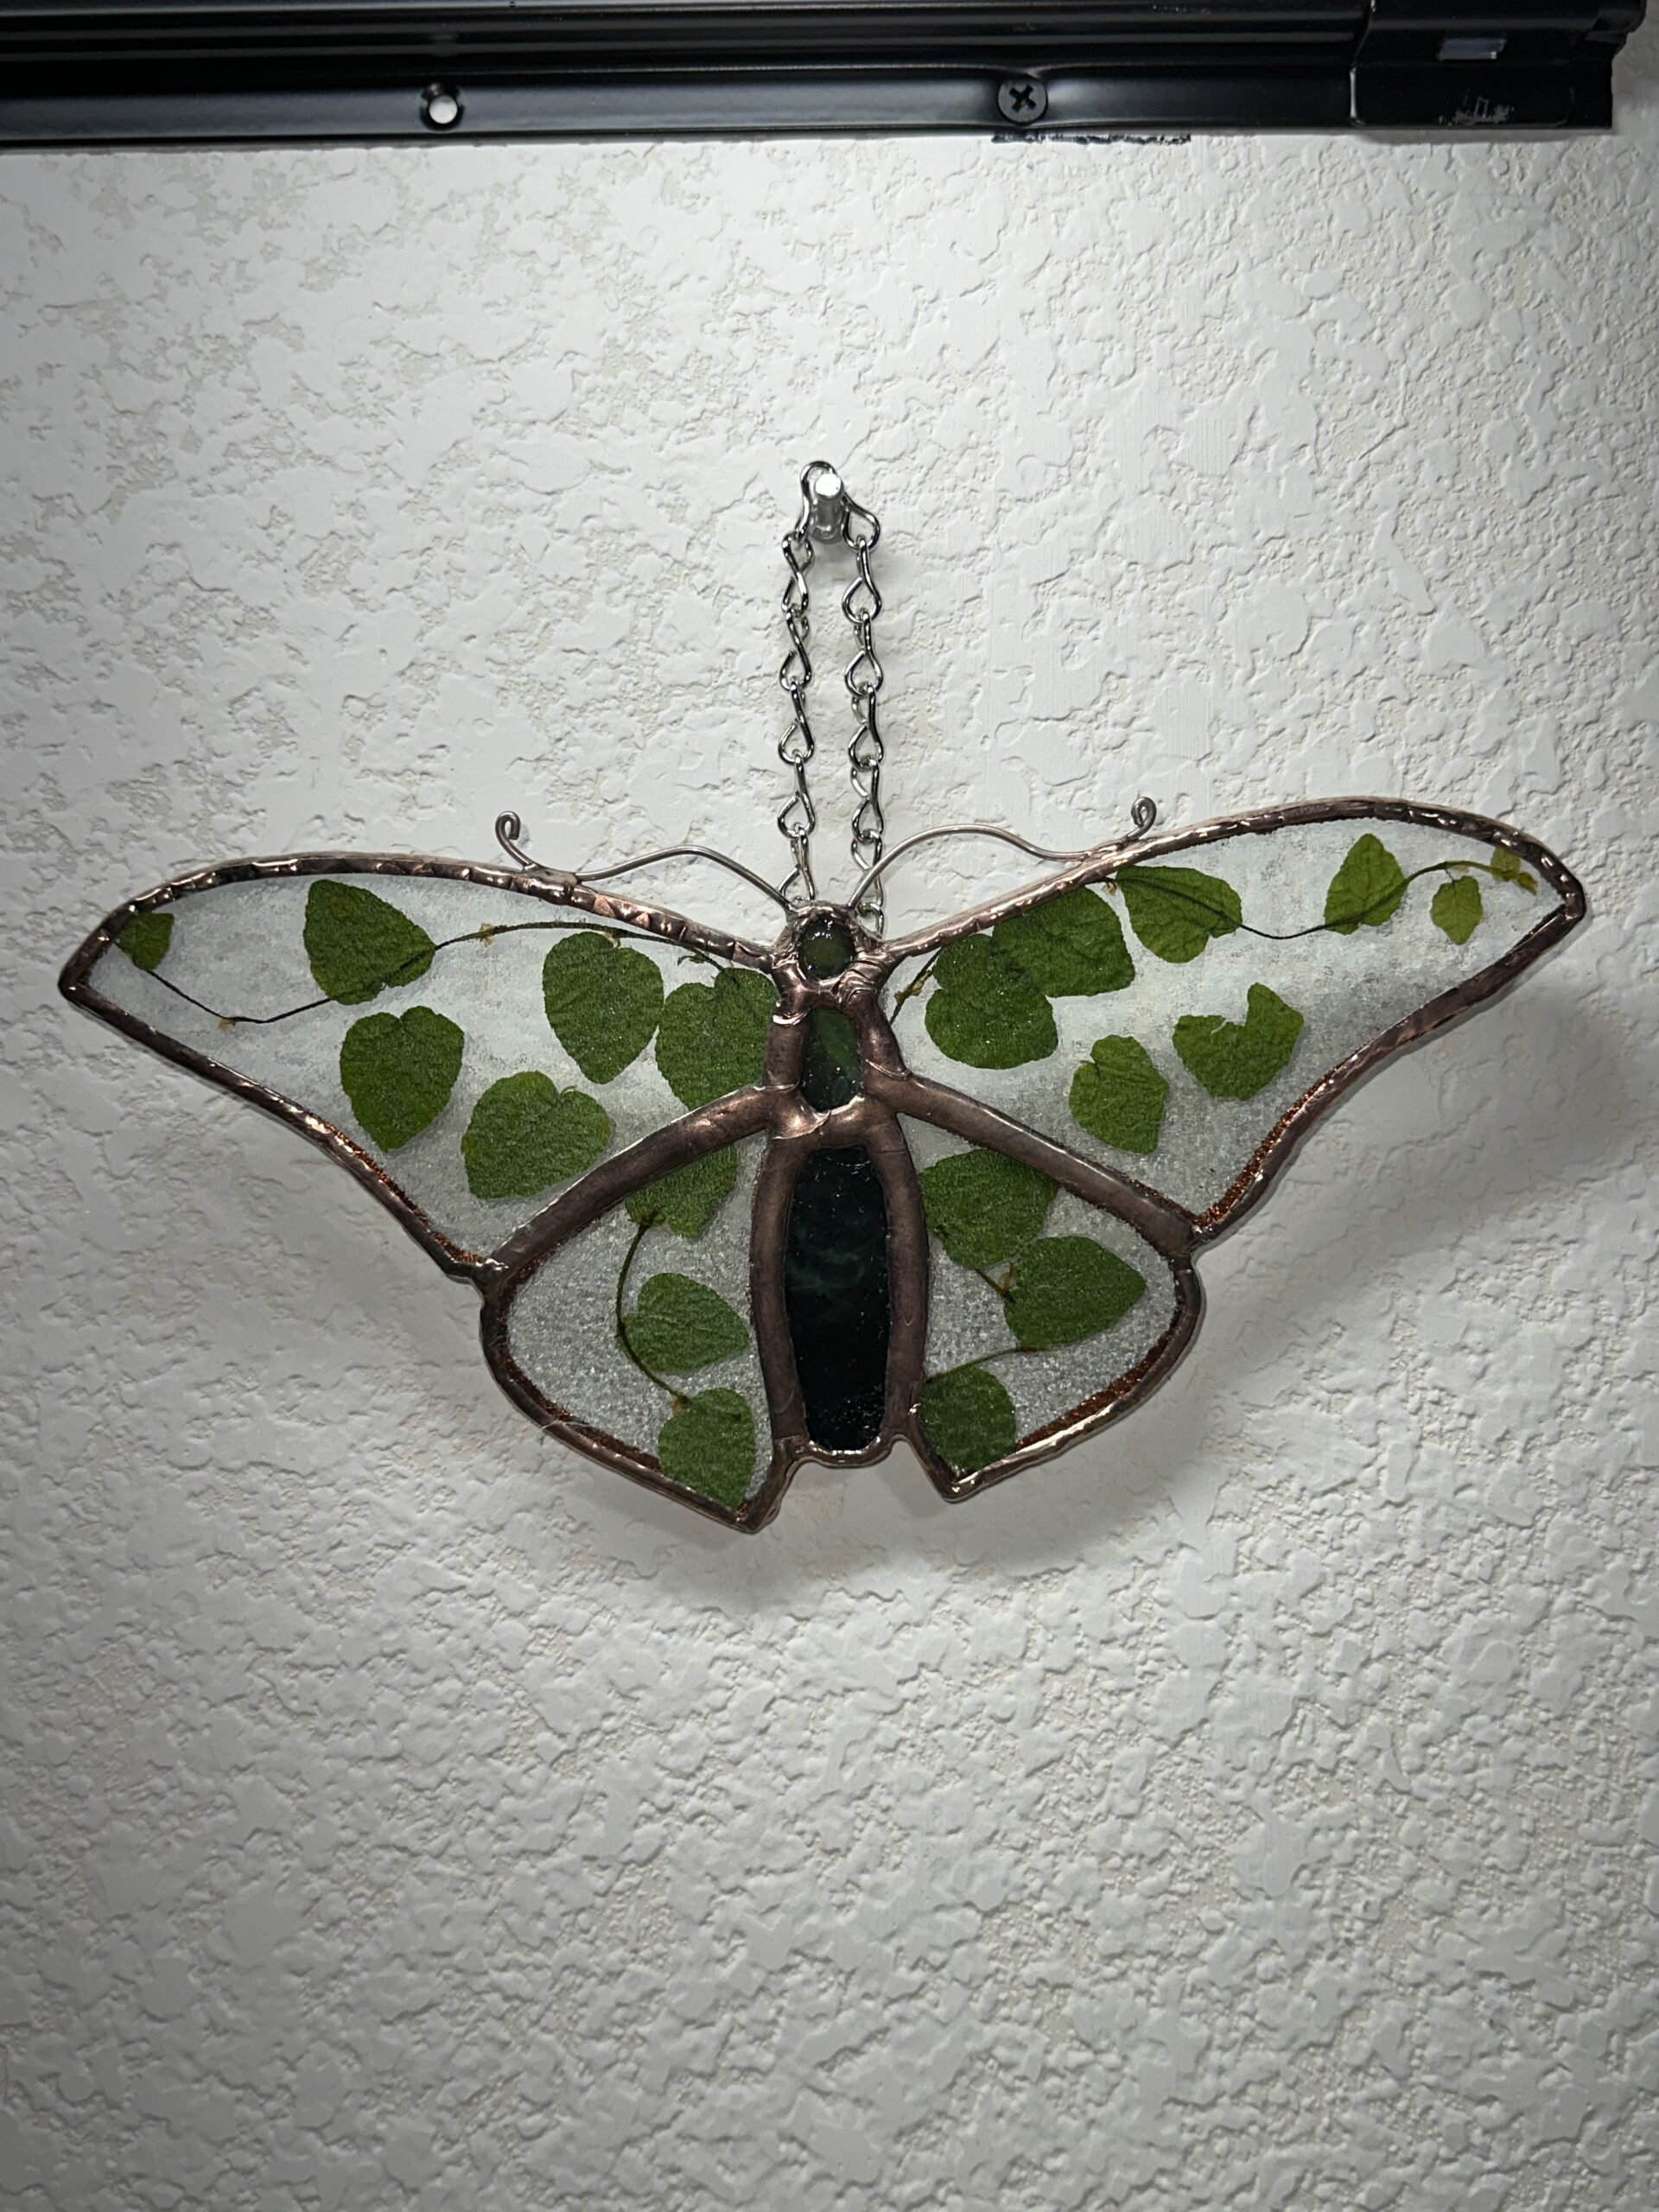 A butterfly made of green body and clear wing glass with creeping fig leaves sandwiched in between two panes of glass for the wings.